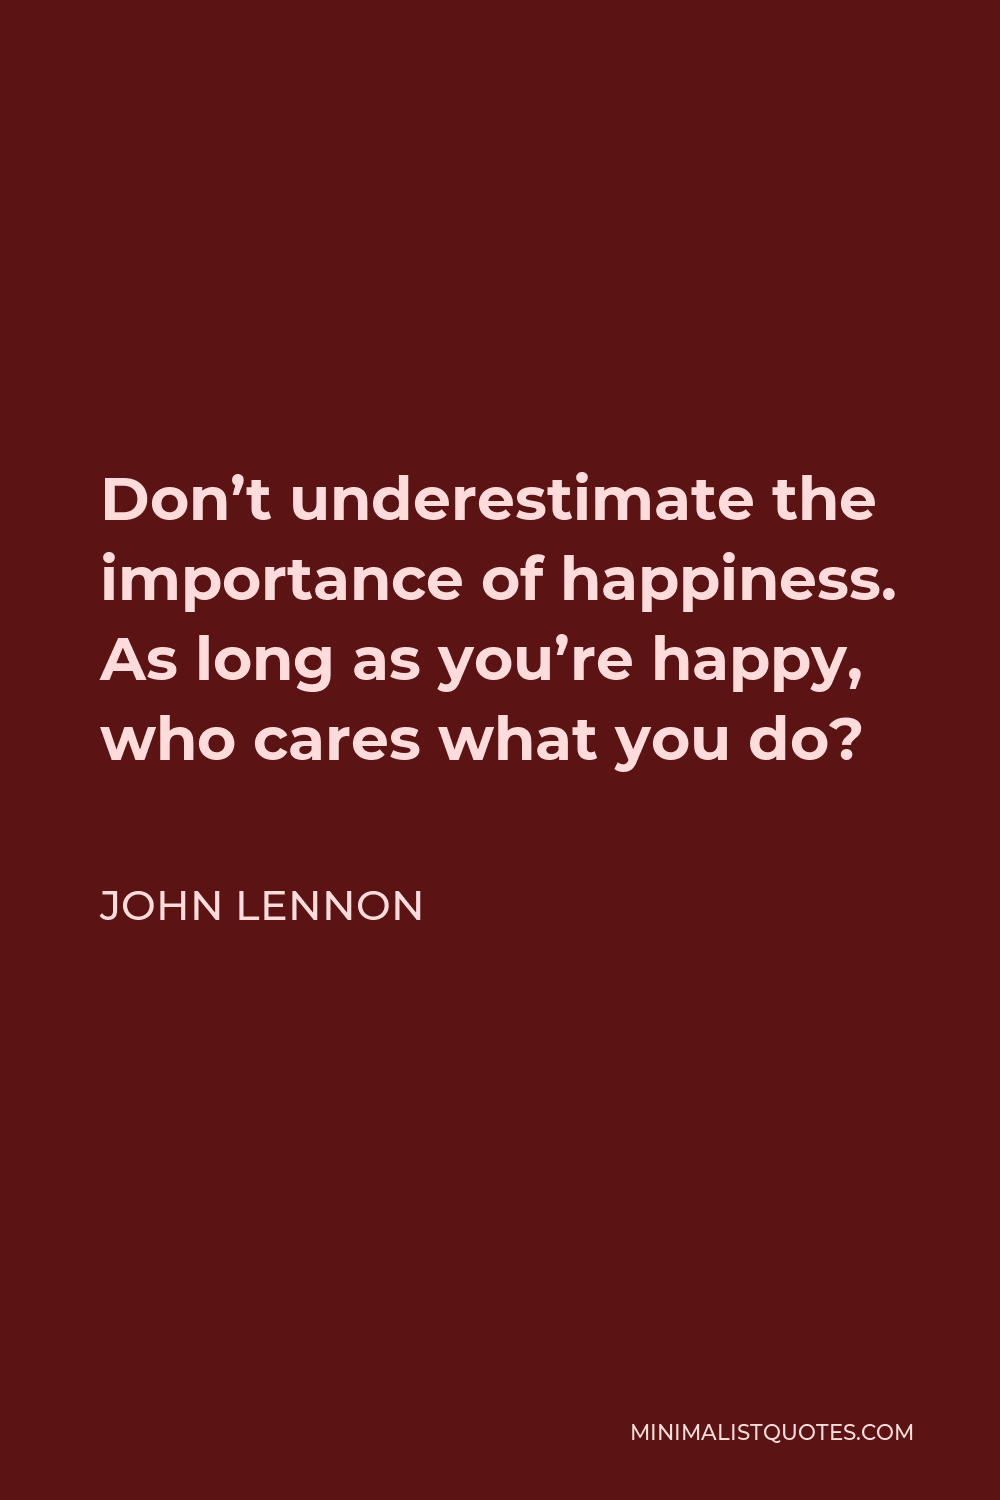 John Lennon Quote - Don’t underestimate the importance of happiness. As long as you’re happy, who cares what you do?